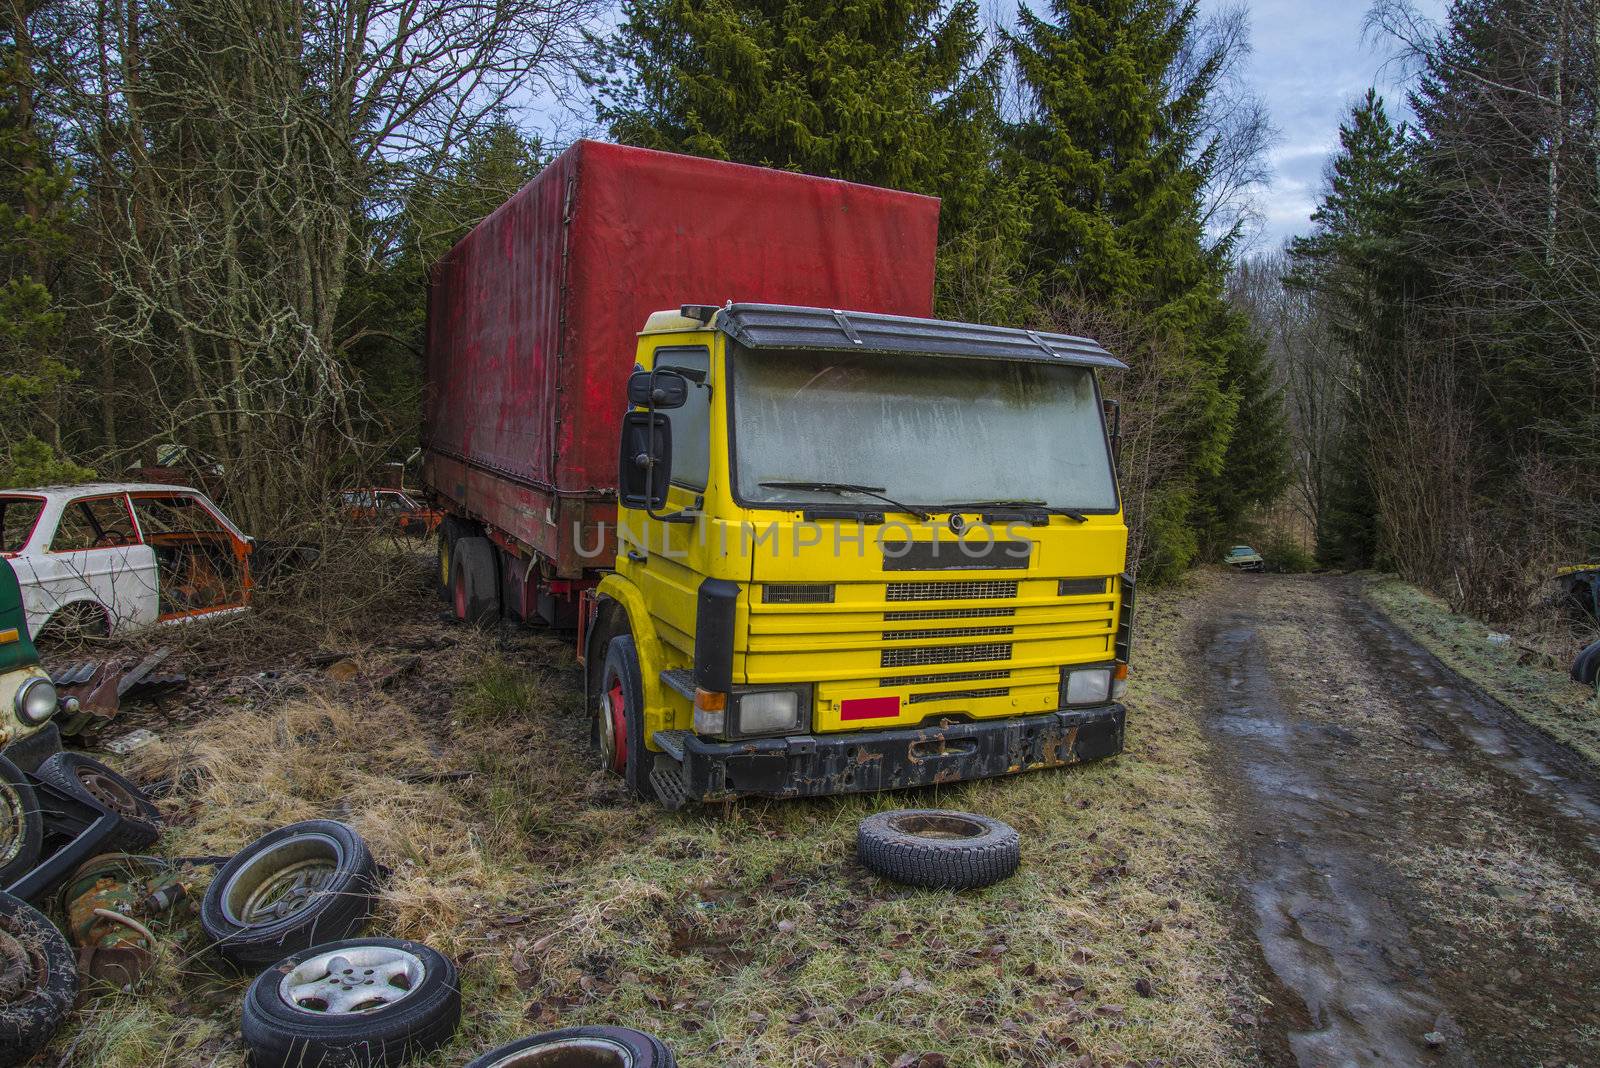 scrapyard for cars (yellow truck) by steirus